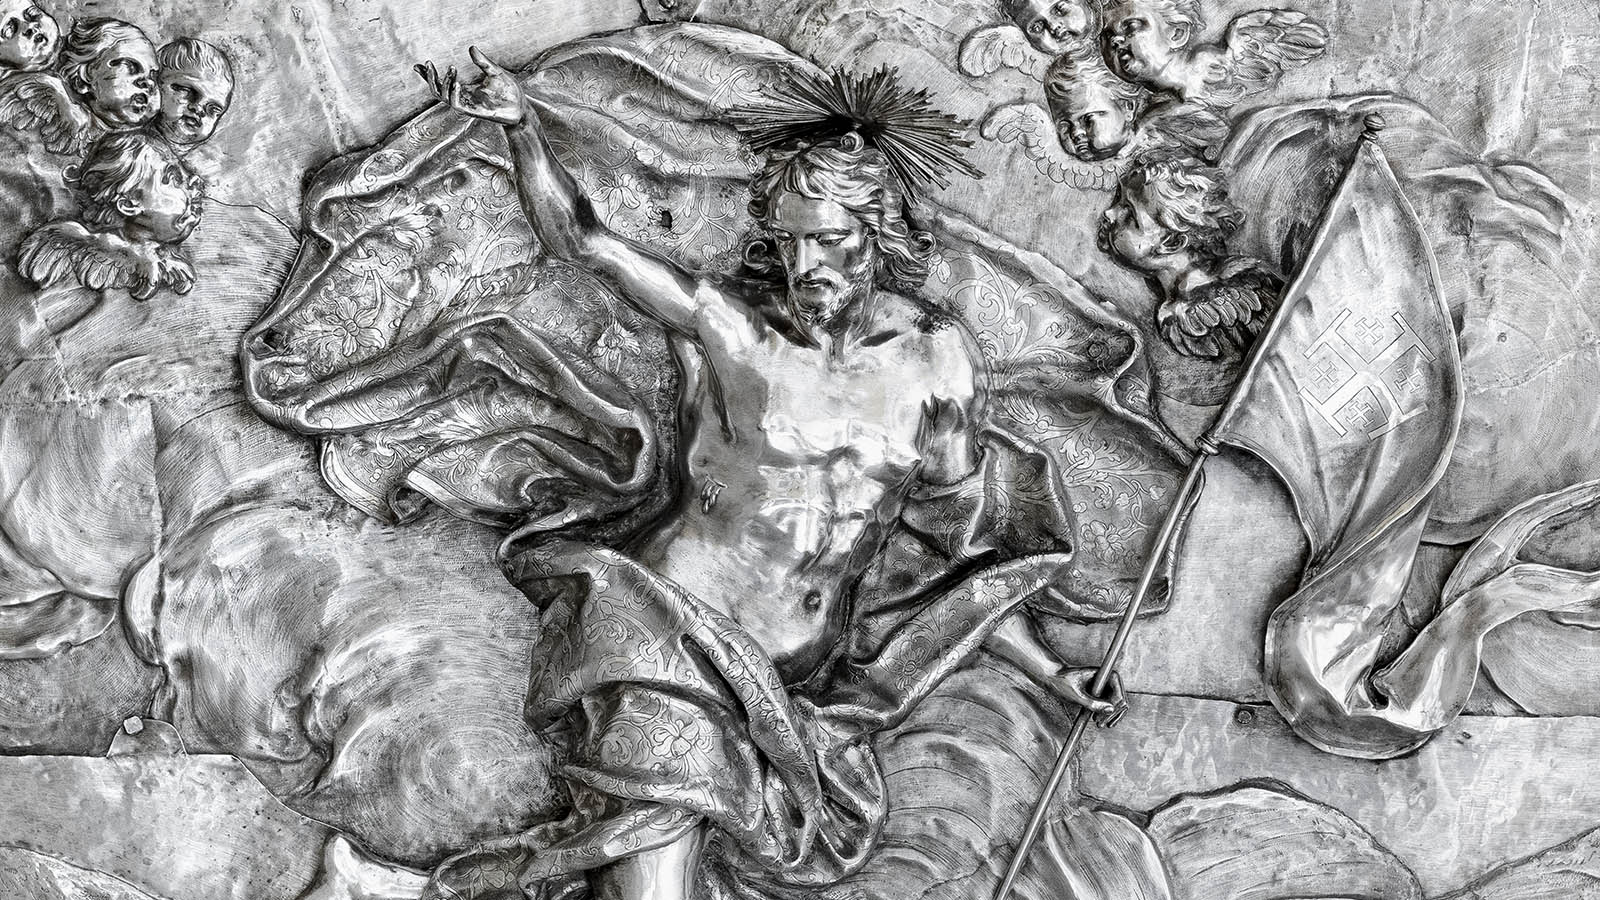 Relief with Resurrection of Jesus [detail]. Naples, Italy, 1736. Silver. Custody of the Holy Land, Jerusalem.